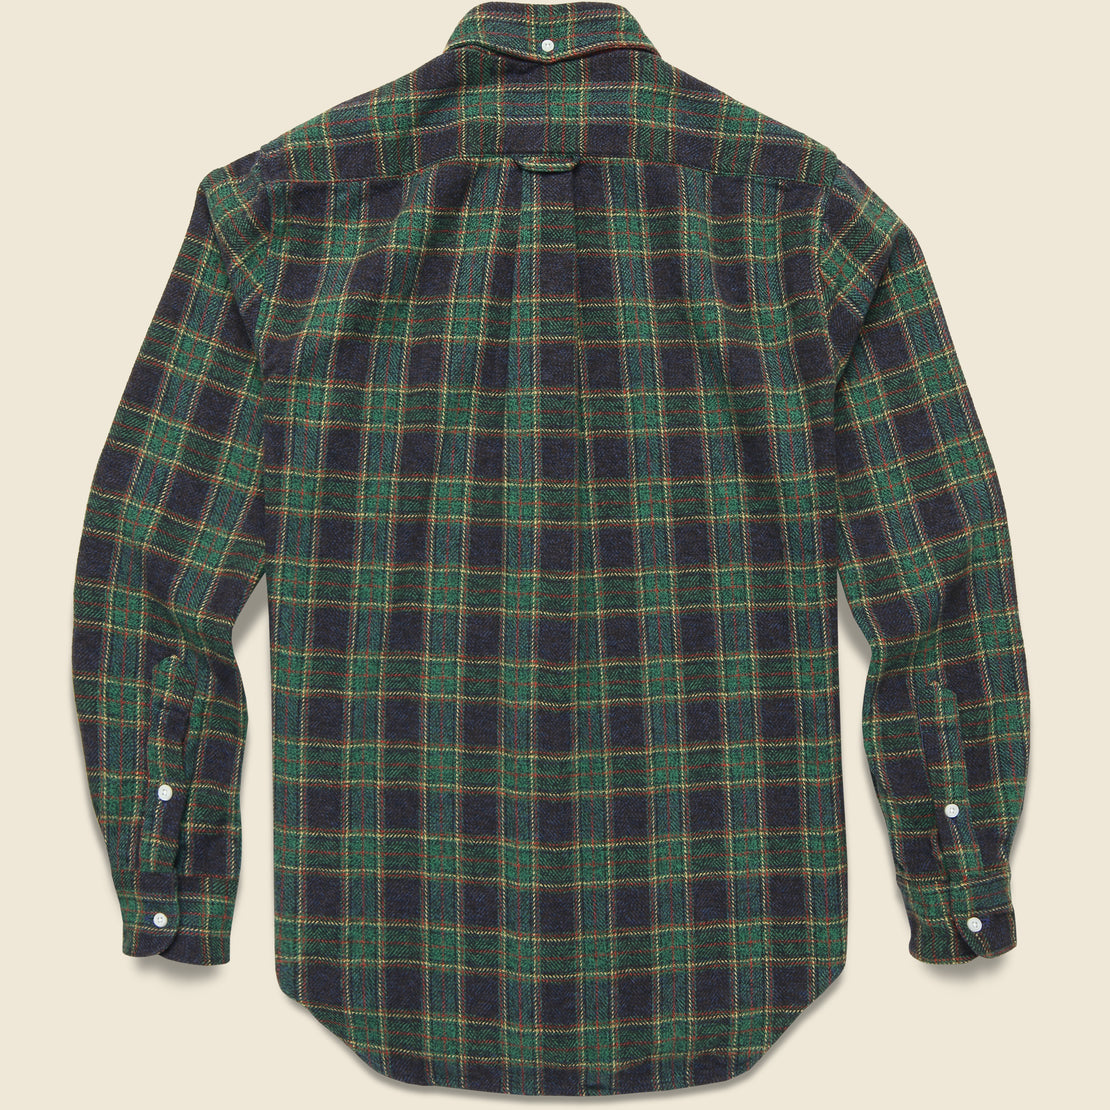 Cotton Tweed Check Flannel - Green - Gitman Vintage - STAG Provisions - Tops - L/S Woven - Plaid